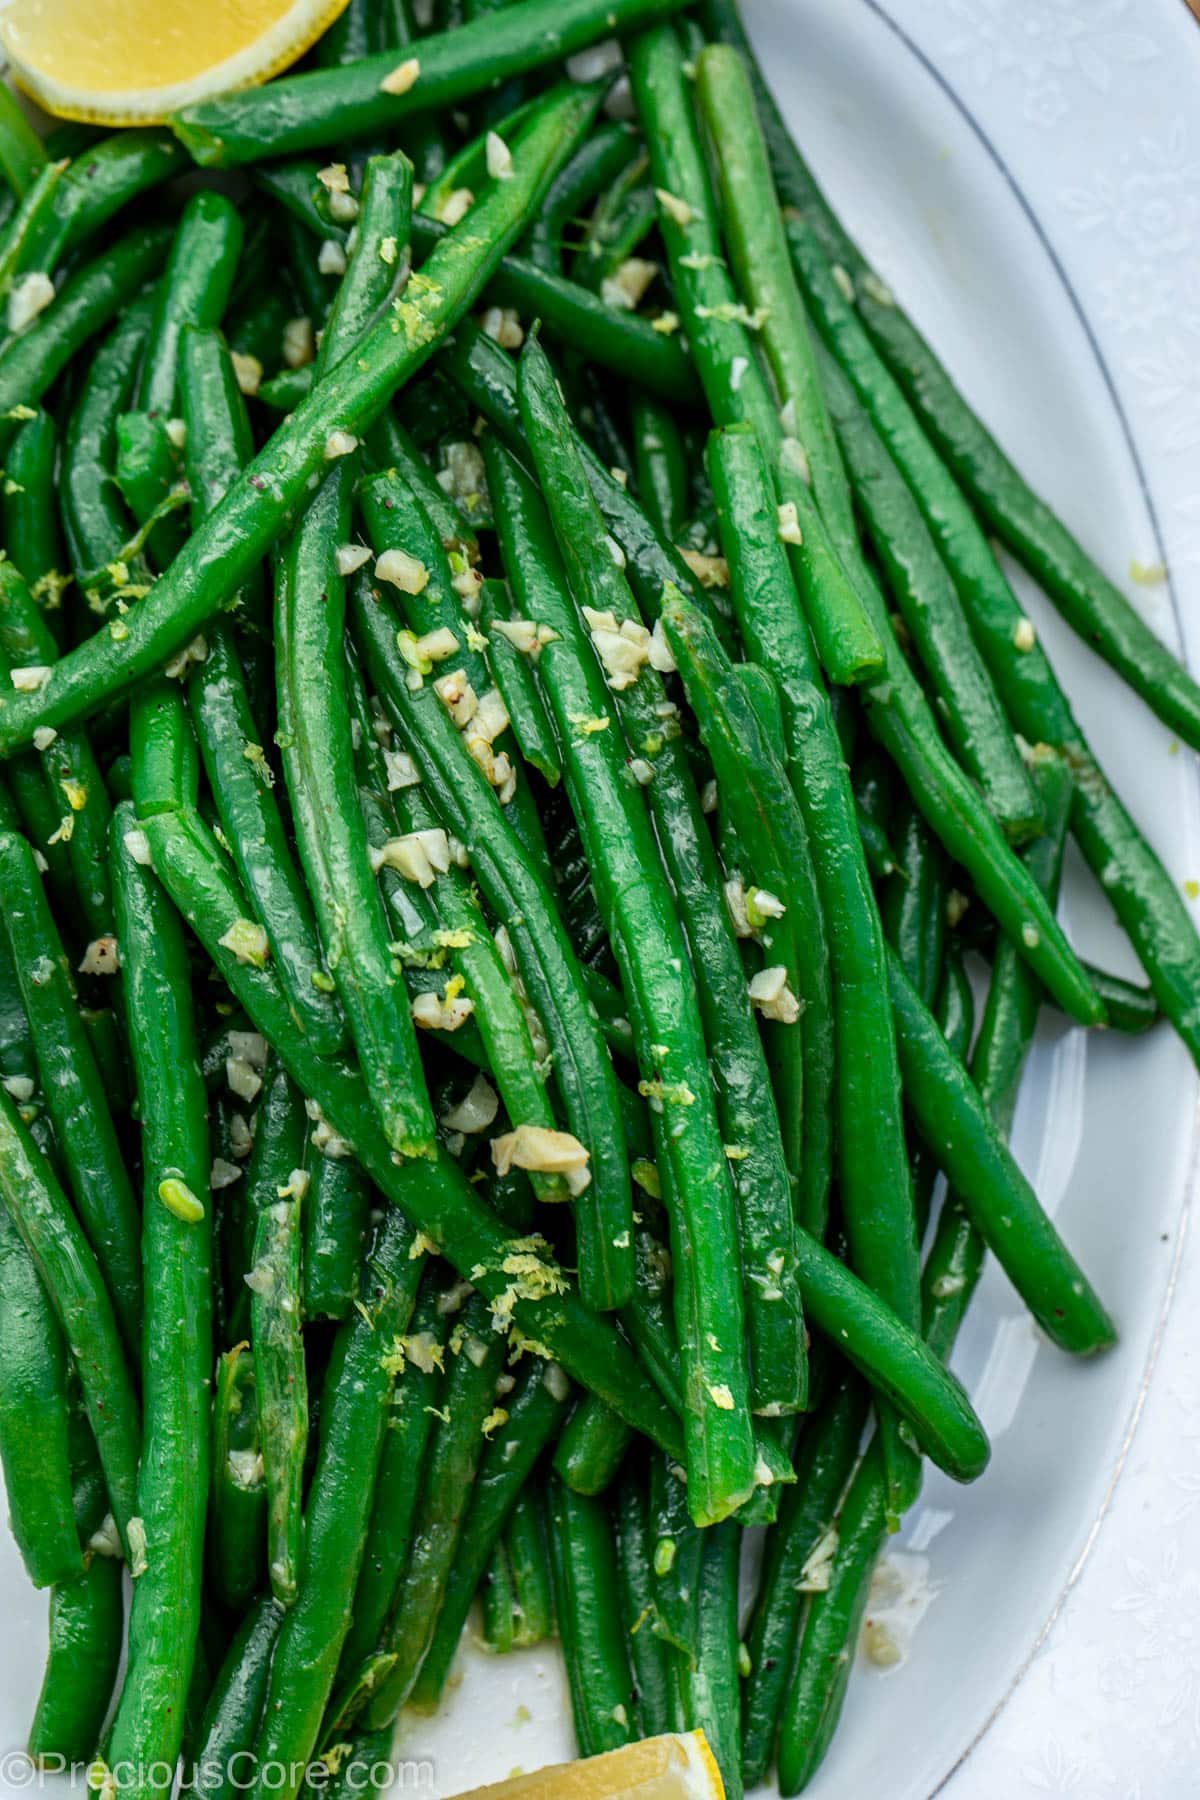 Cooked green beans on a serving tray.